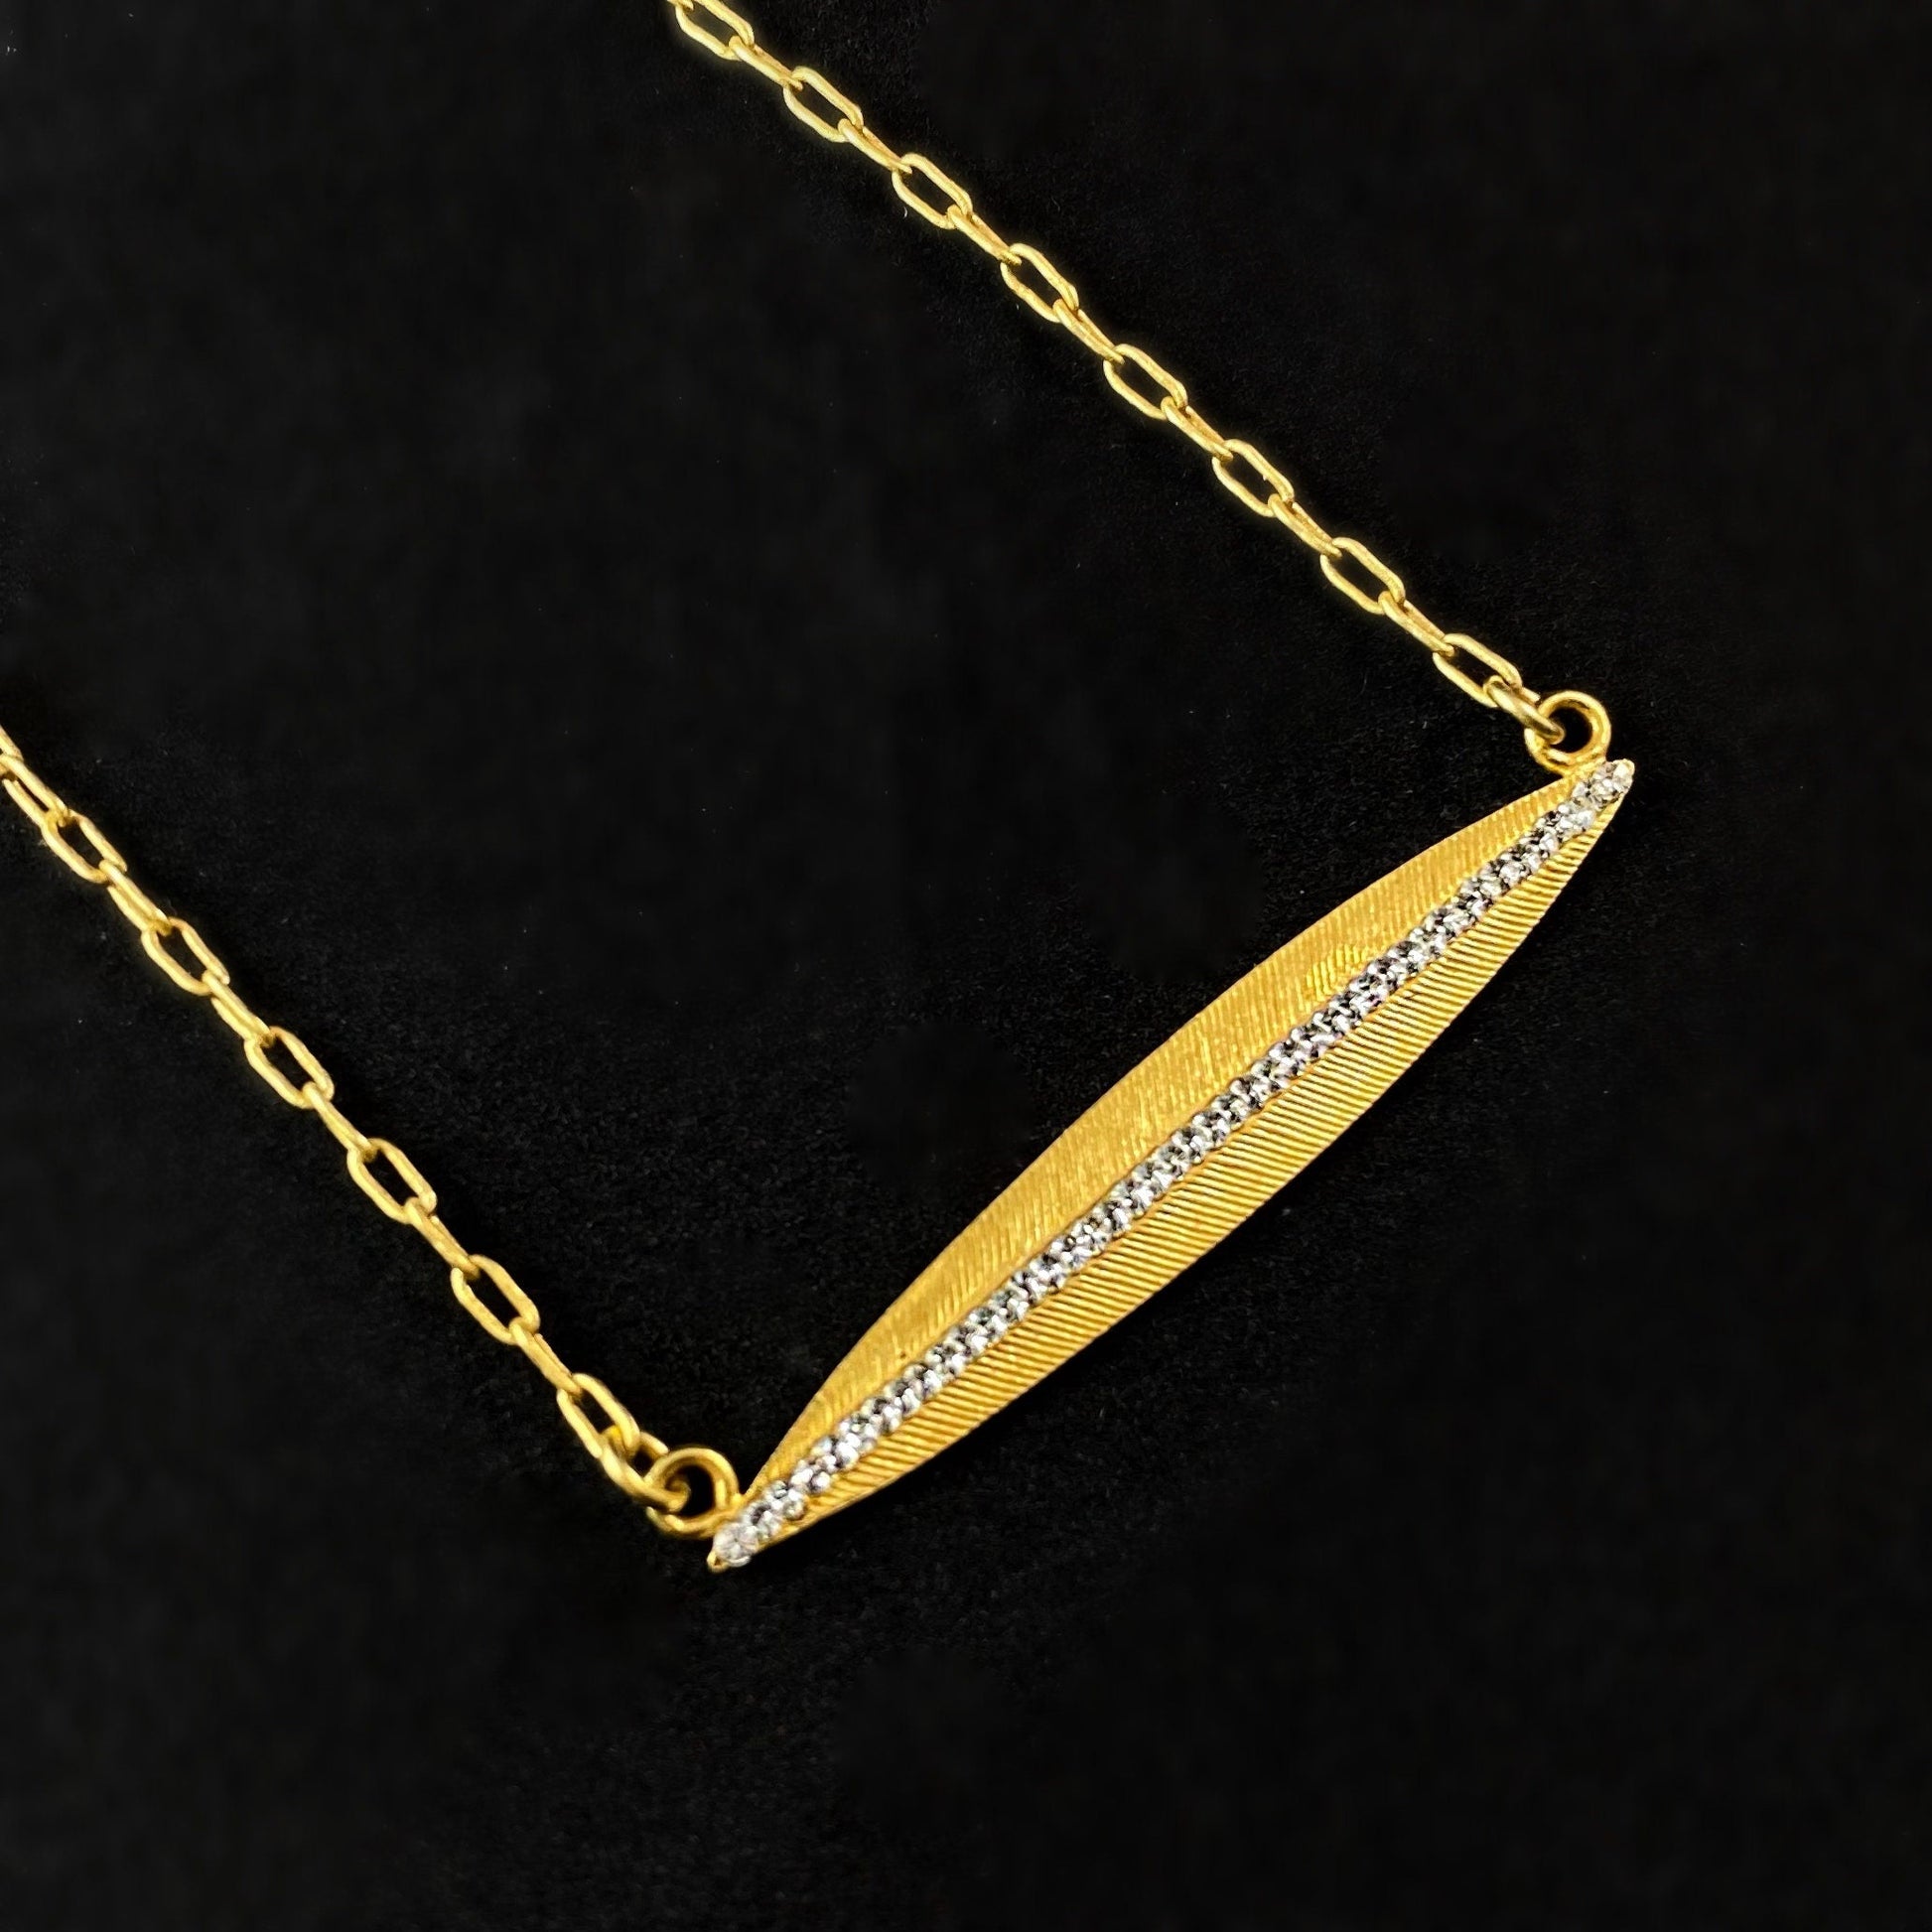 Delicate Gold and Crystal Necklace - La Vie Parisienne by Catherine Popesco